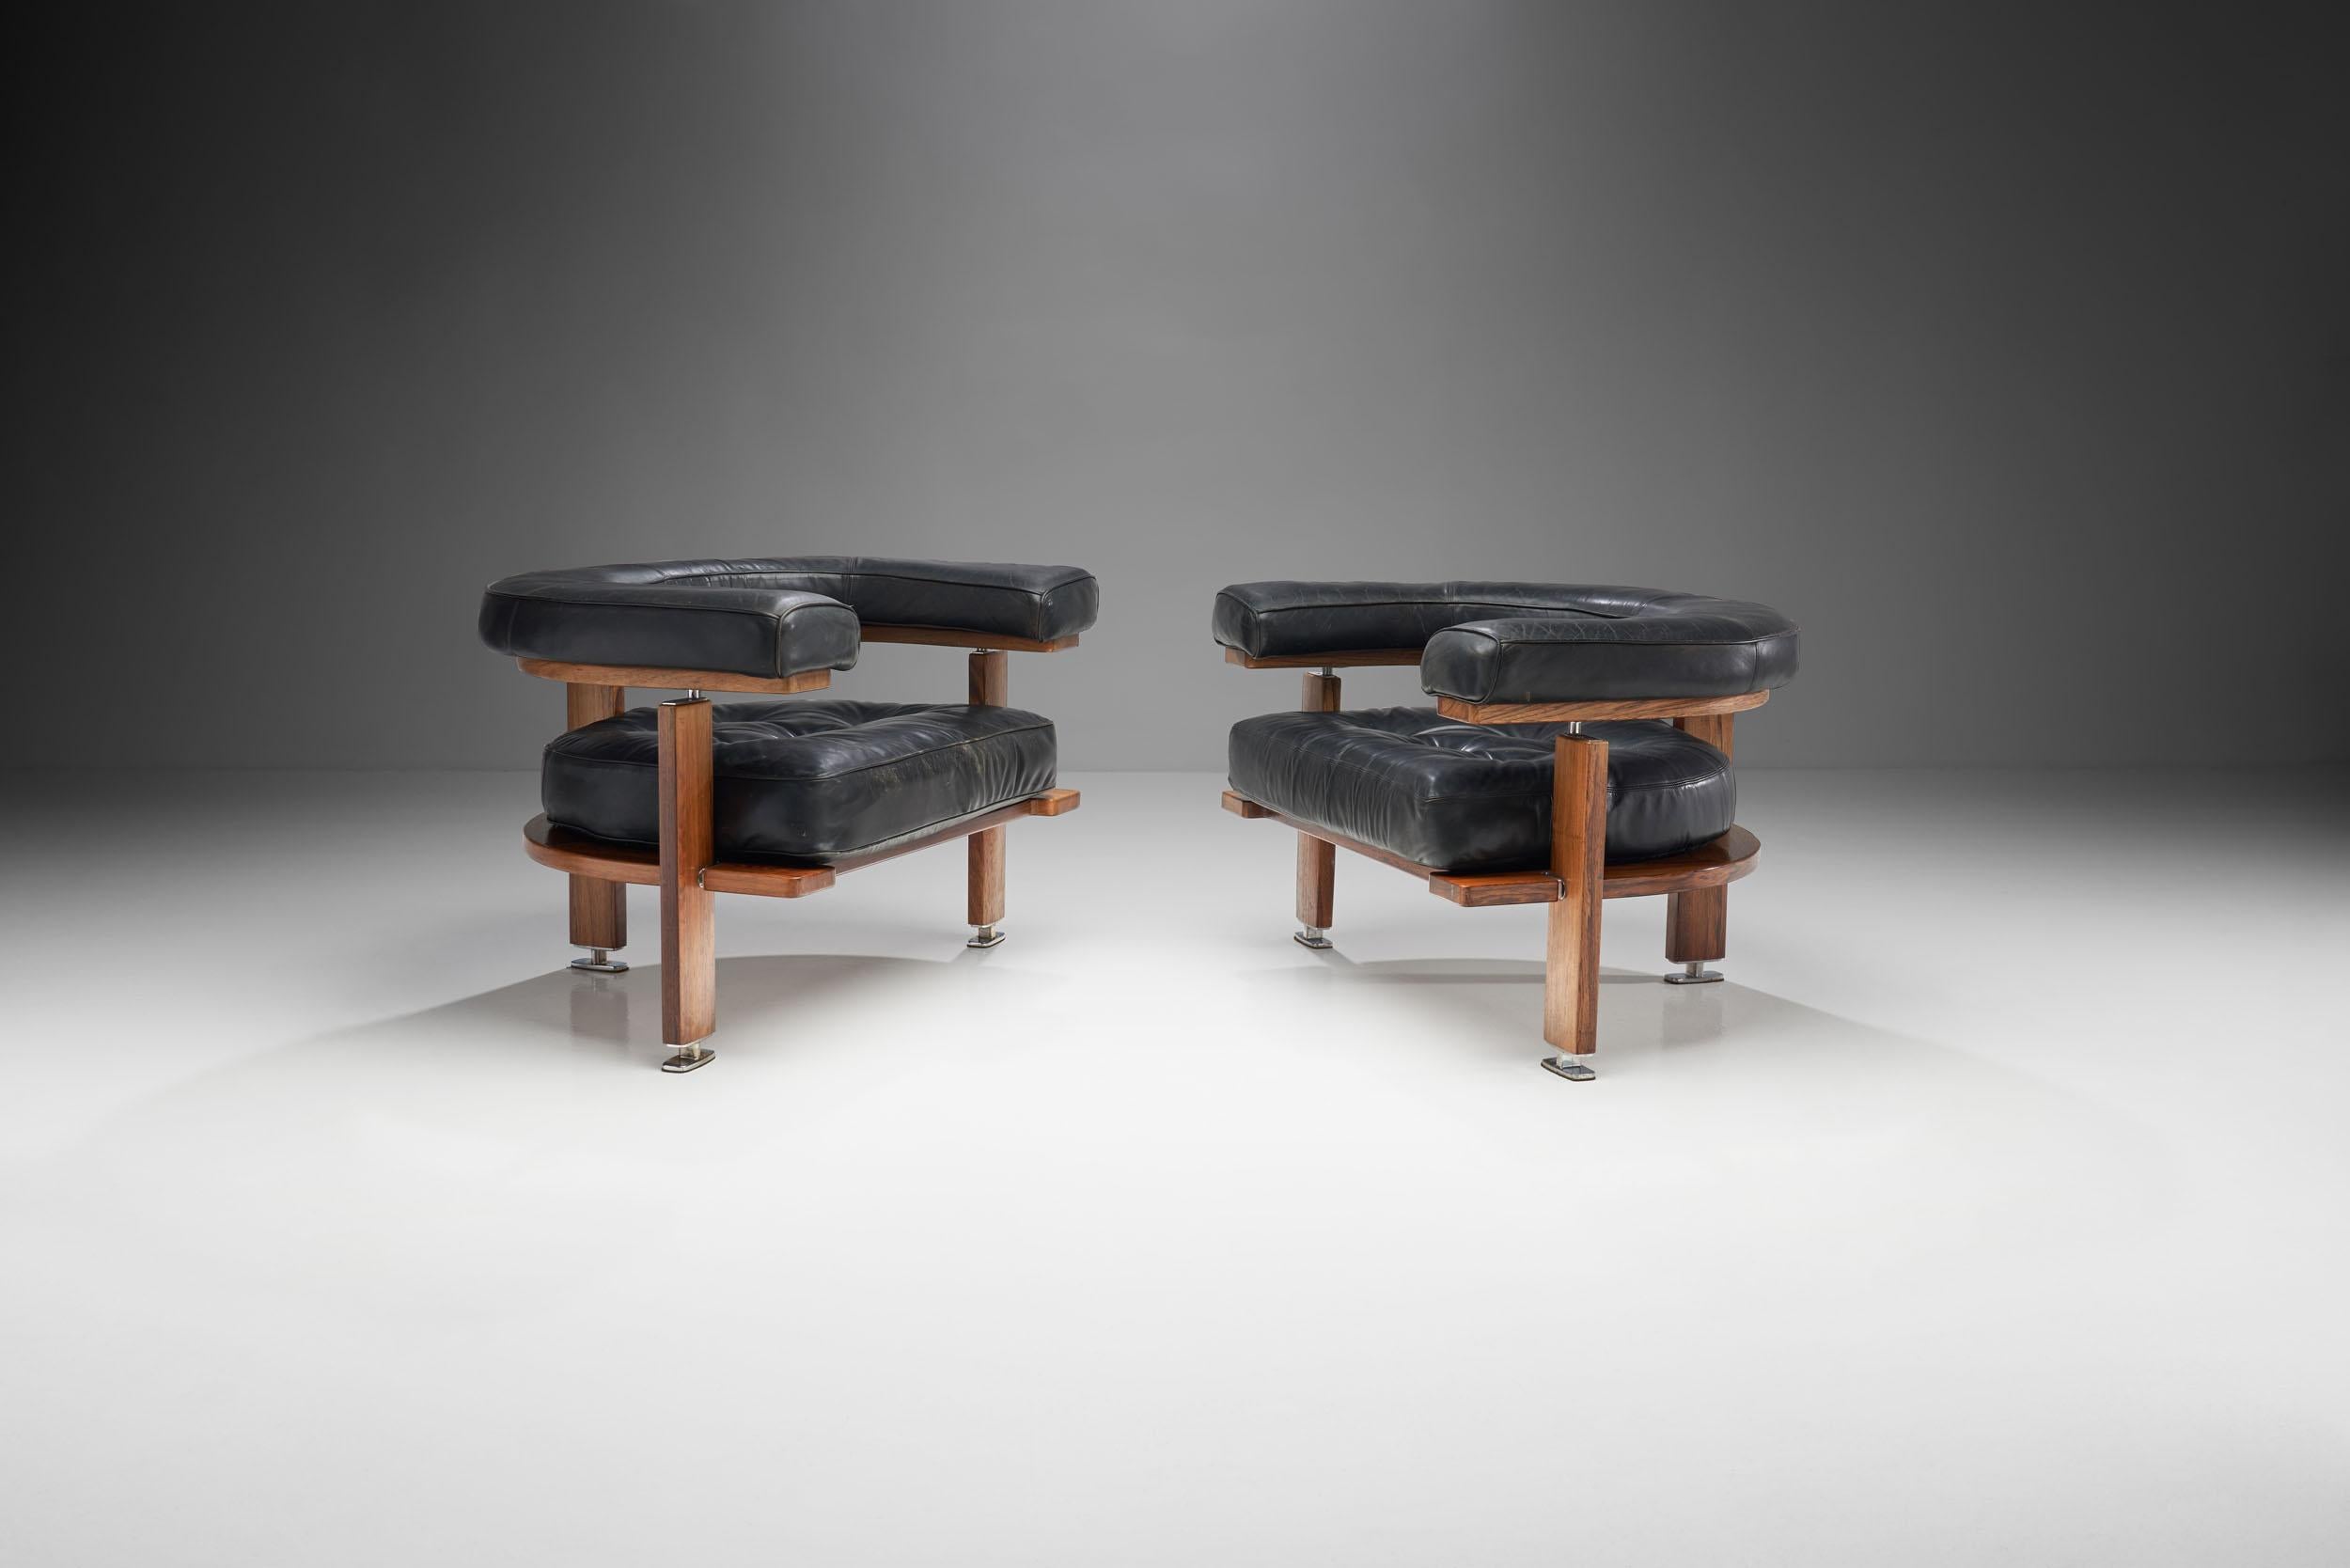 This pair of “Polar” lounge chairs was designed by the eminent Finnish designer, Esko Pajamies, and produced by Lahden Lepokalusto Oy Finland during the 1960s.

These leather chairs feature a half moon shaped backrest and comfortable, aesthetically